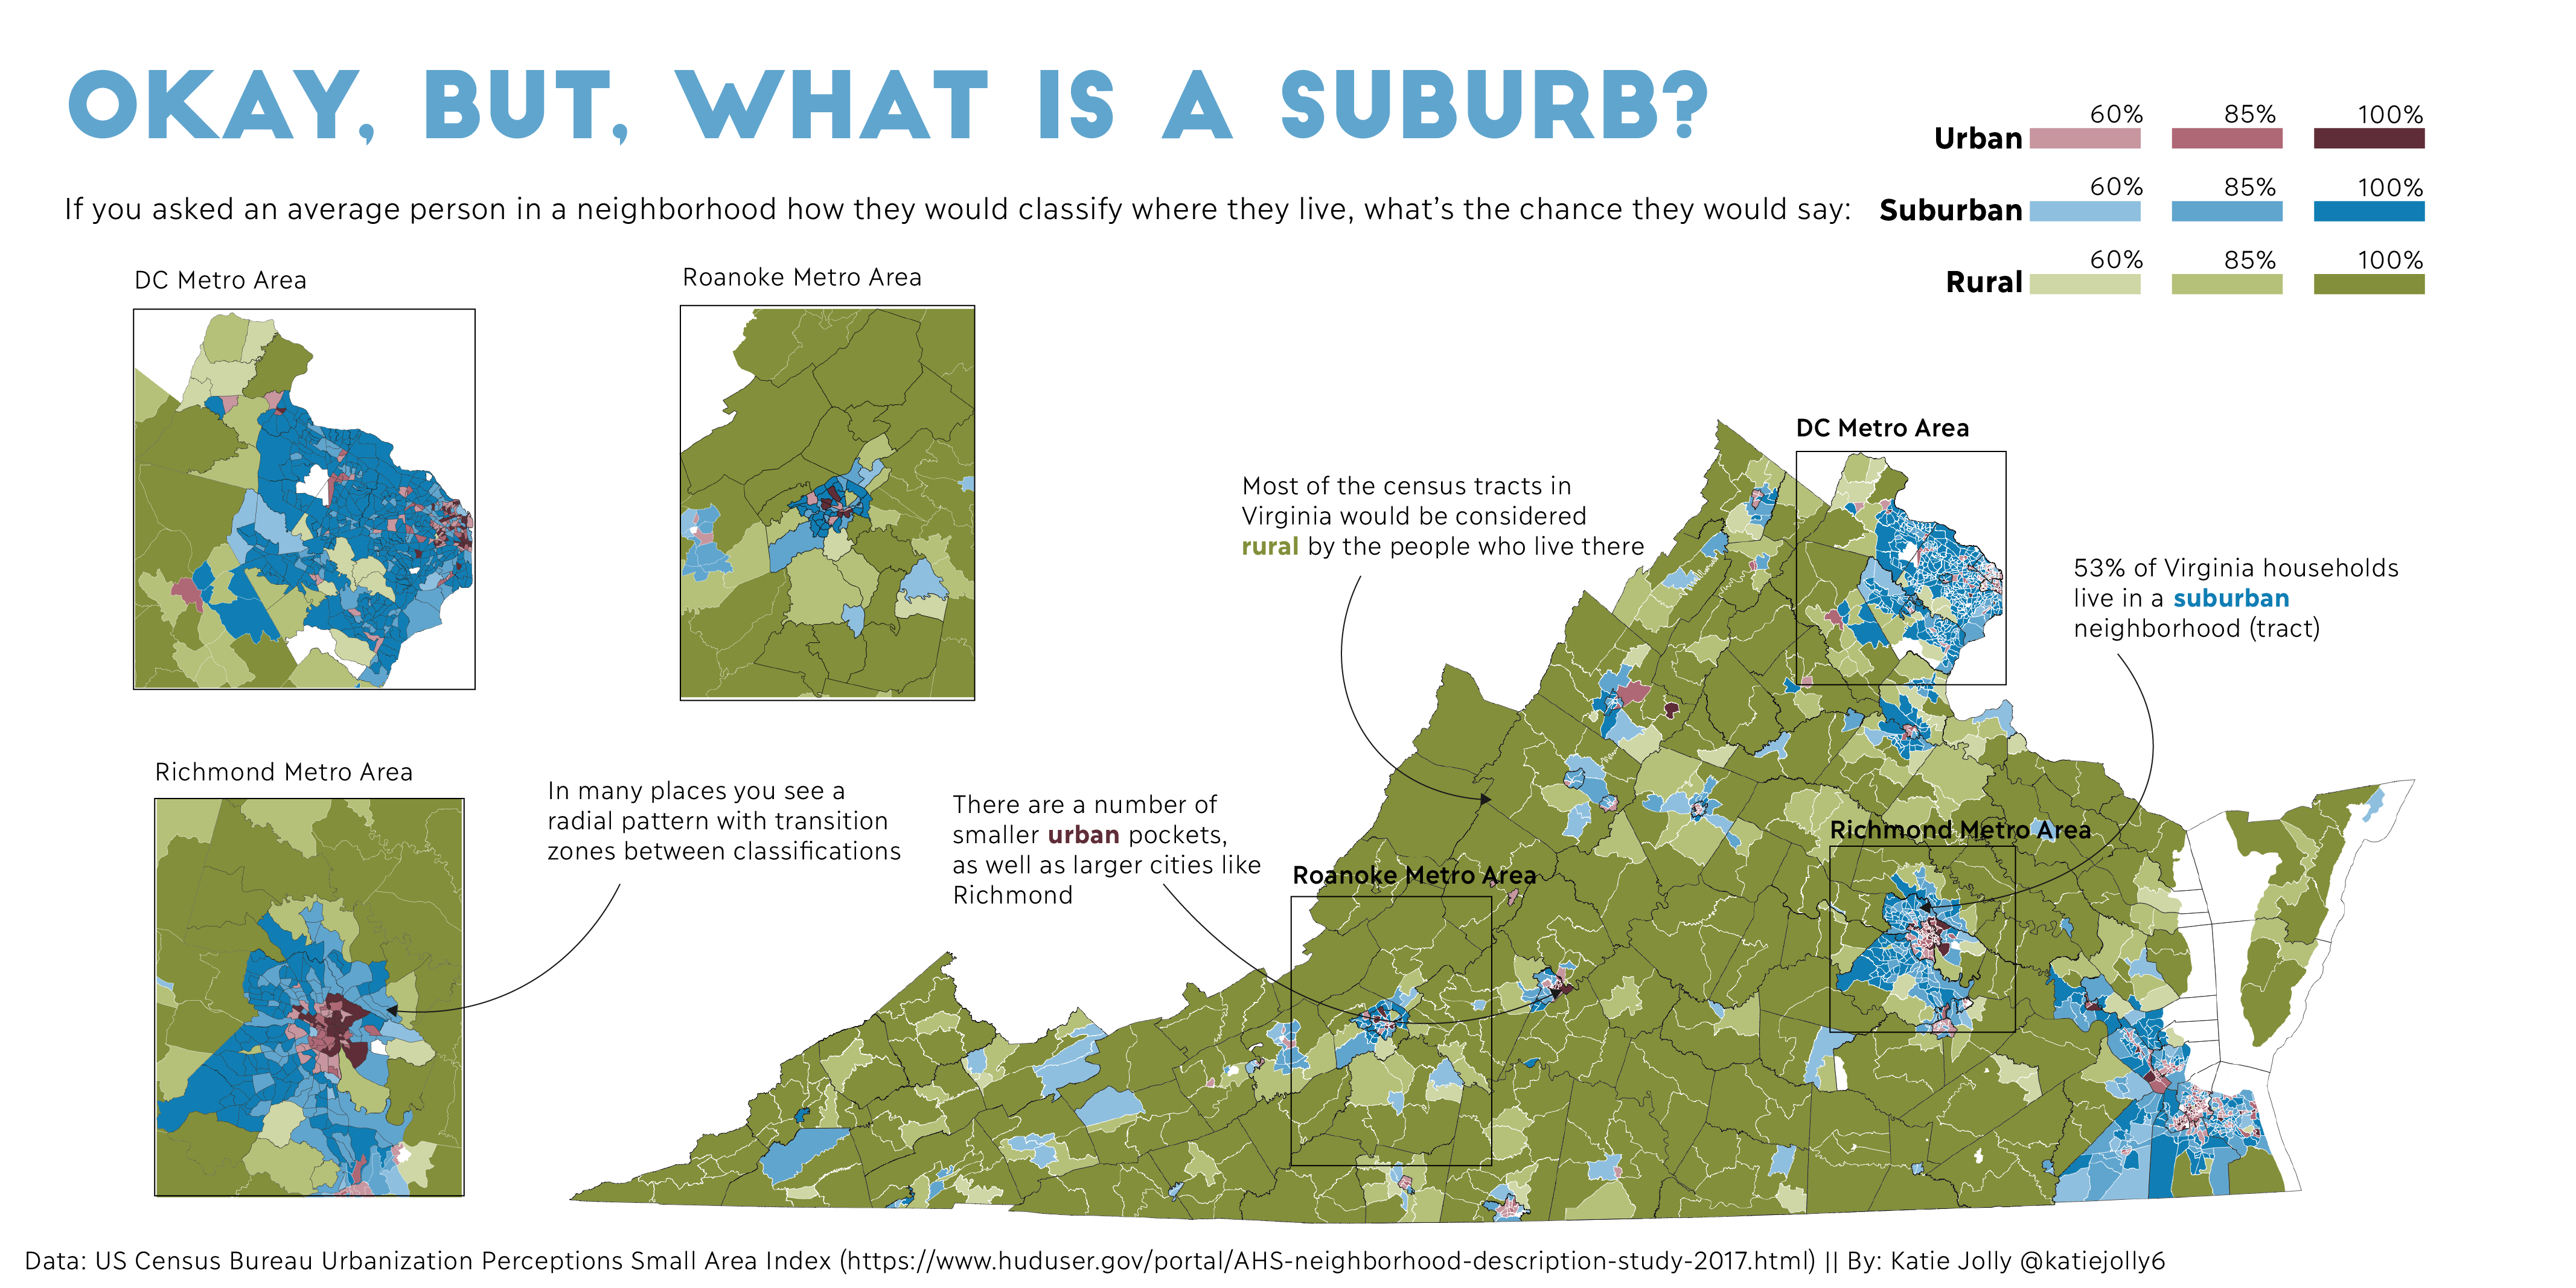 map showing urban, suburban, and rural areas in Virginia. Highlights
the DC, Richmond, and Roanoke metro
areas.